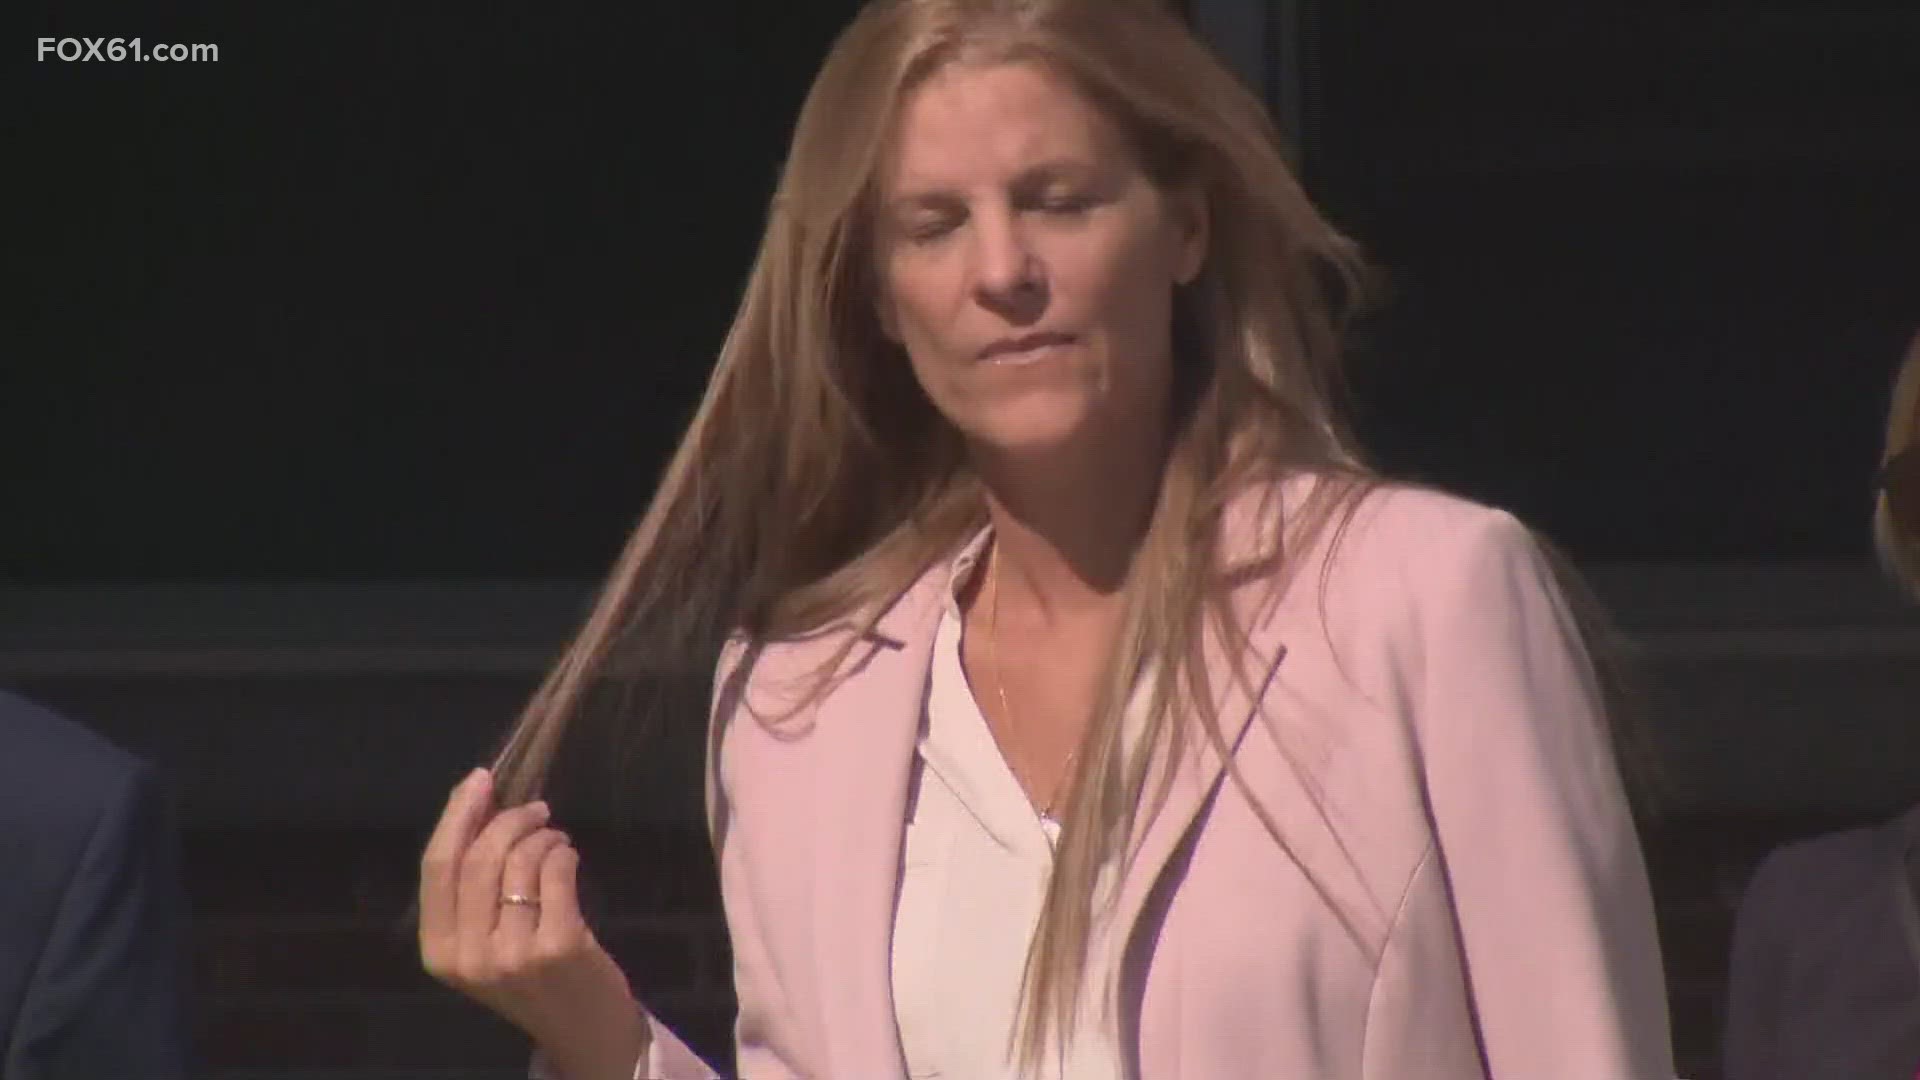 Troconis is charged in connection to the disappearance of missing New Canaan mom Jennifer Dulos.